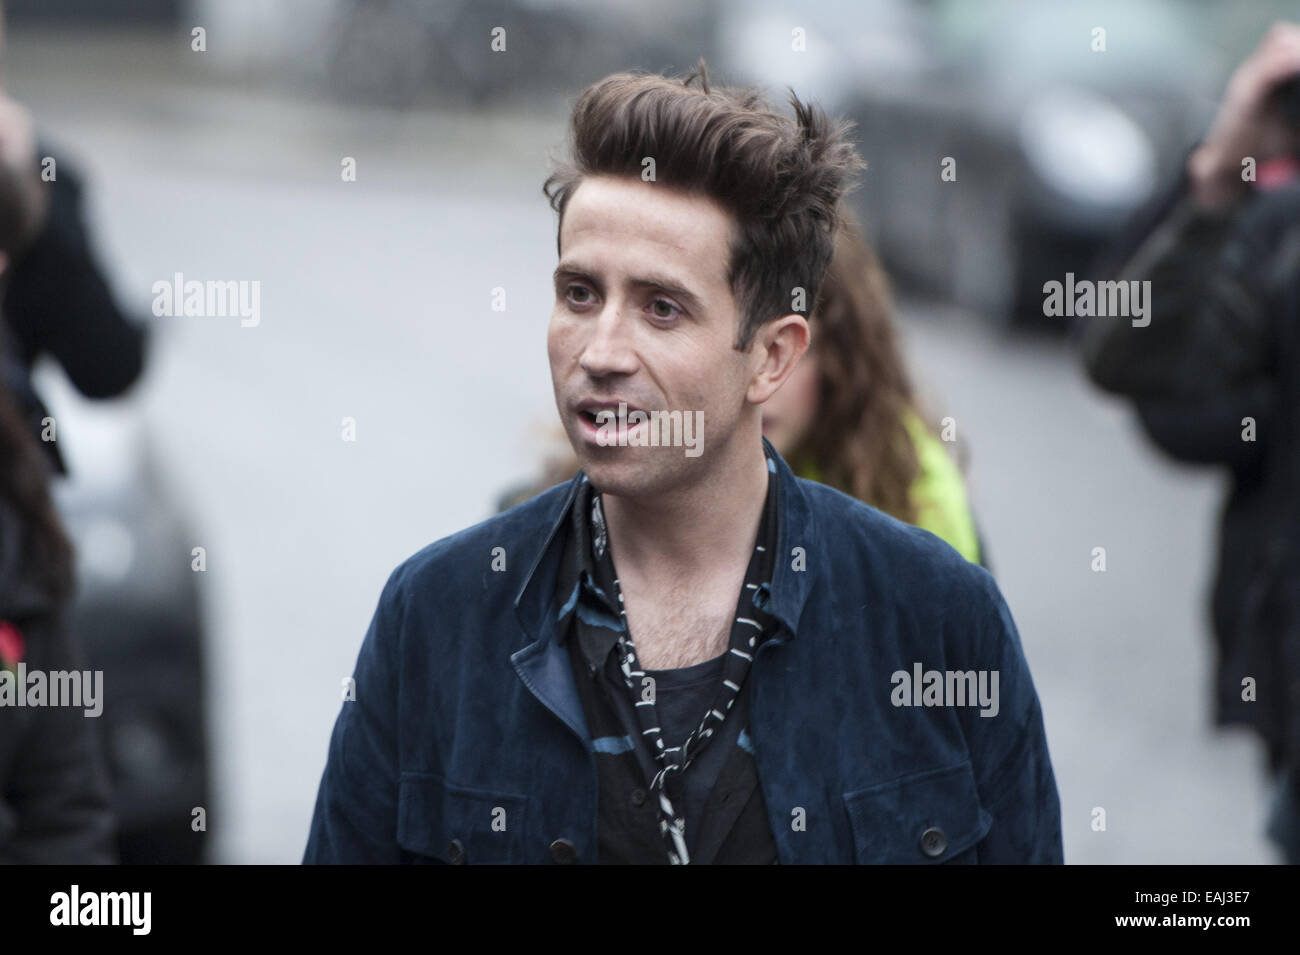 London, London, UK. 15th Nov, 2014. Artists arrive at Sarm Studios in Notting Hill, west London, to record Band Aid. Pictured: Nick Grimshaw. © ZUMA Press, Inc./Alamy Live News Stock Photo